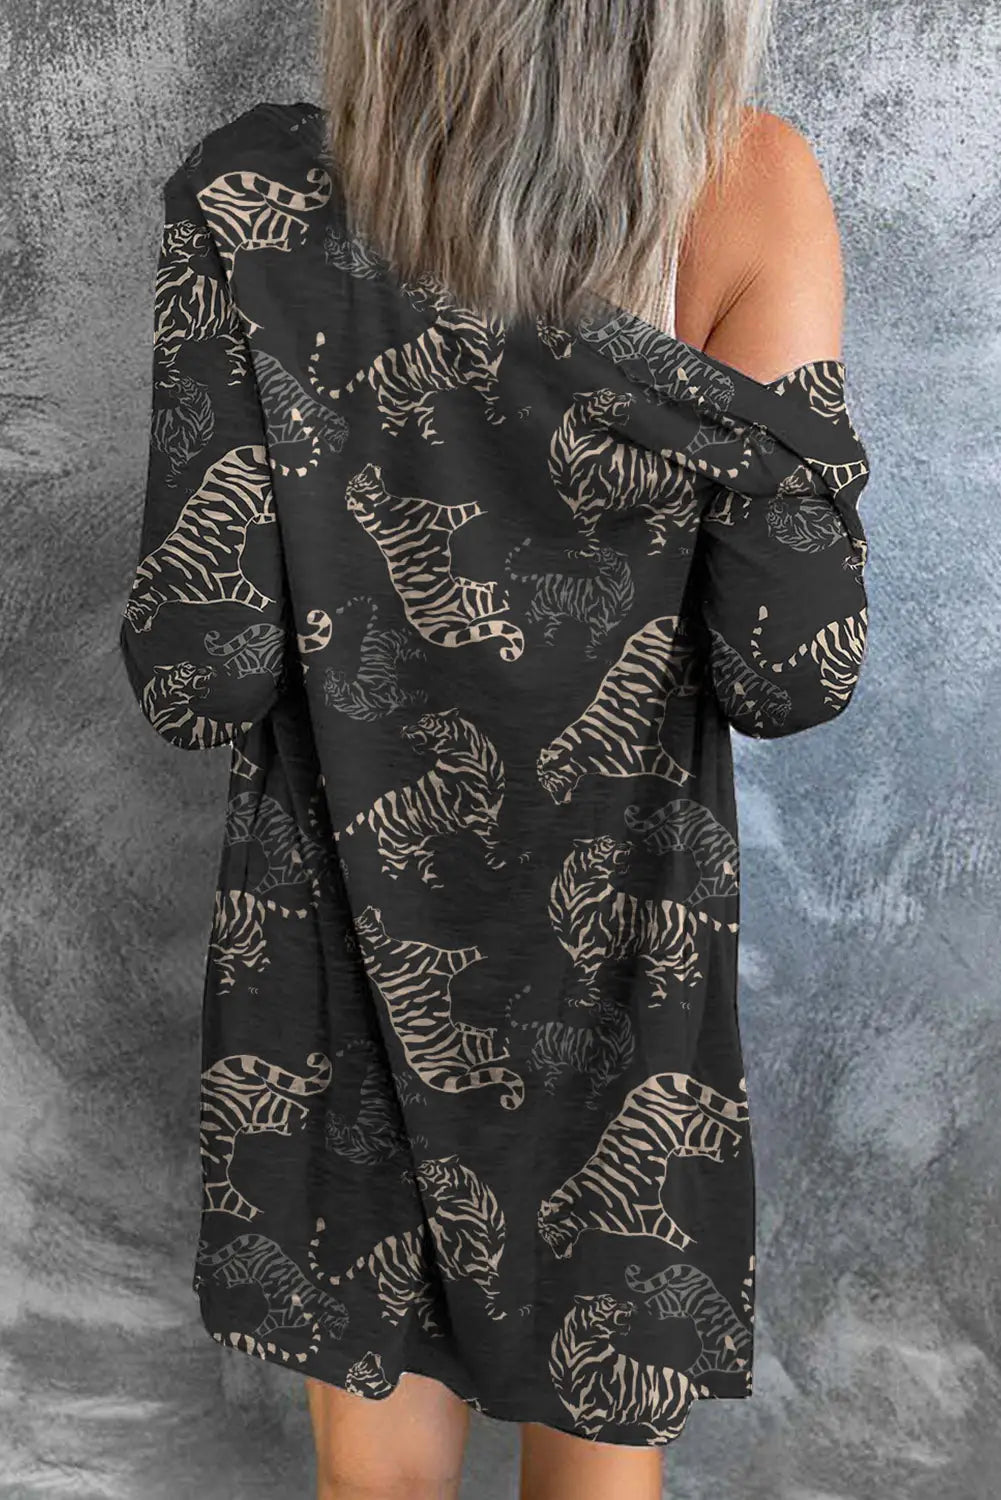 Black wild tiger print button front cardigan - sweaters & cardigans